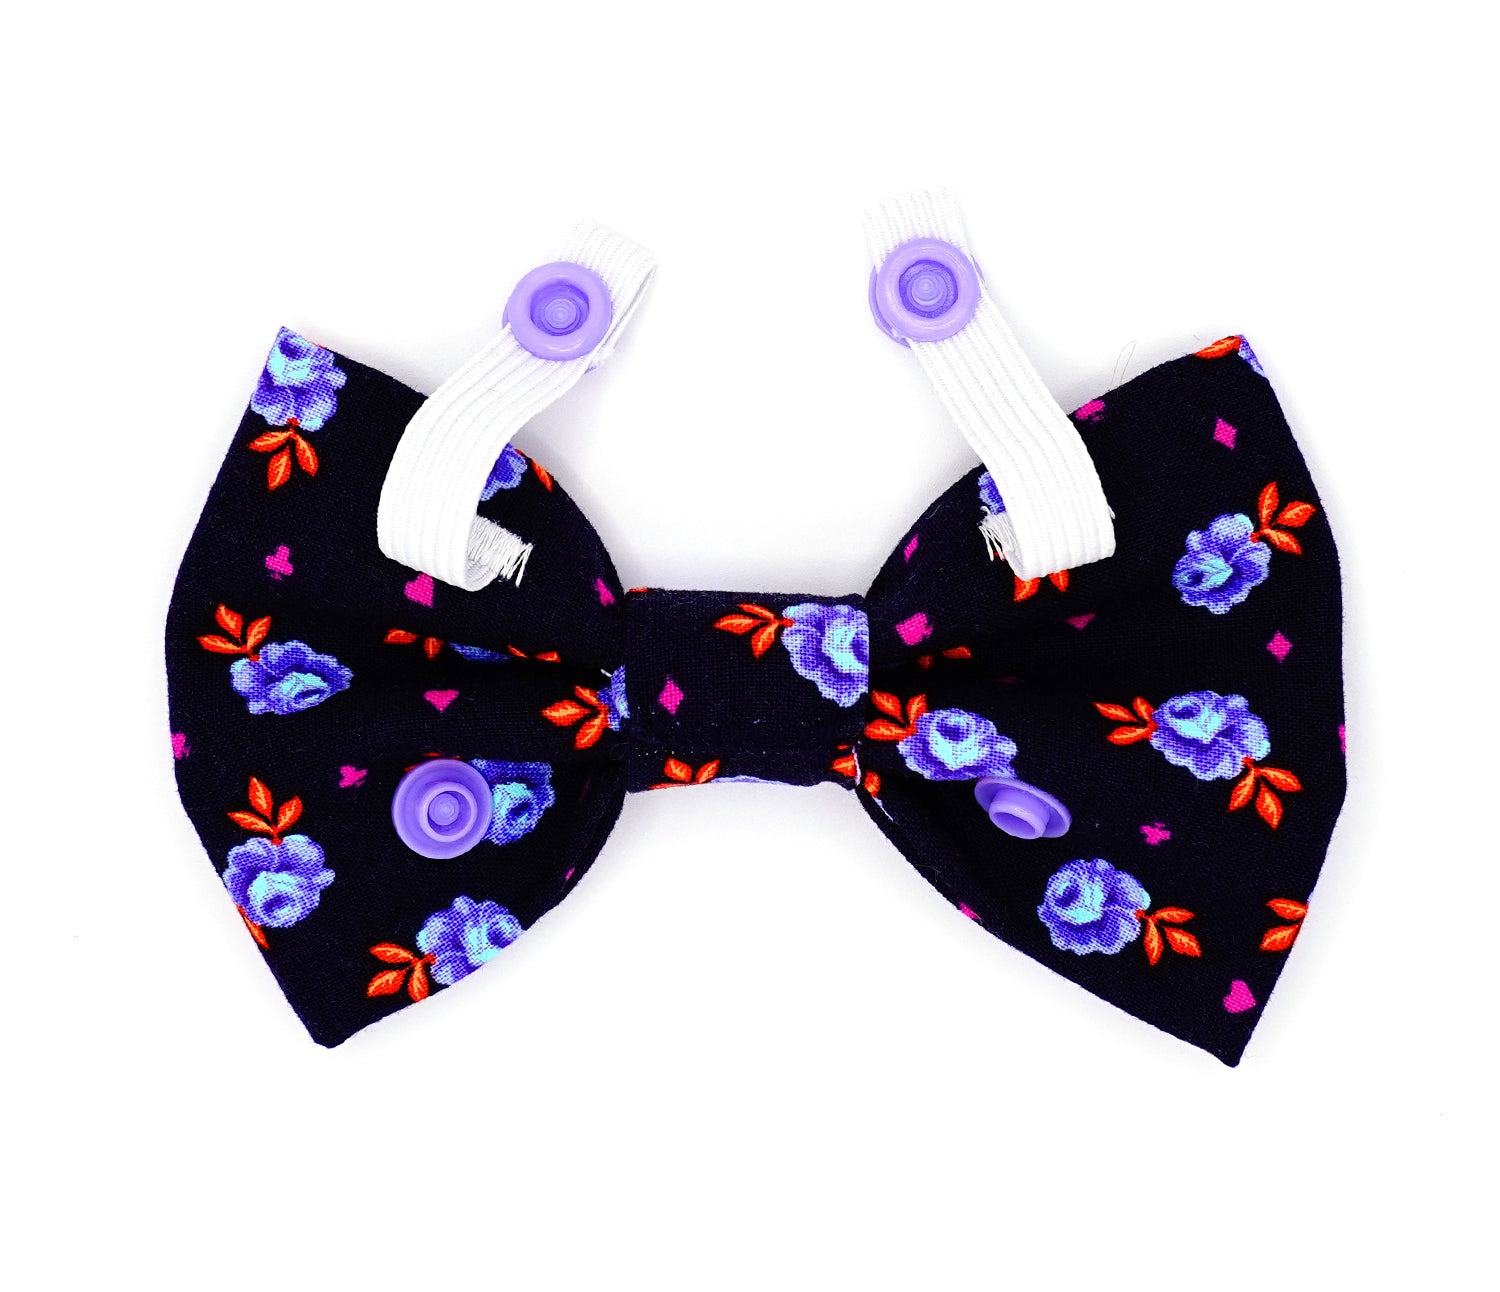 Handmade cotton bow tie for dogs (or other pets). Elastic straps on back with snaps make it easy to add to collar, harness, or leash. Navy blue background with purple and light blue rose buds, bright orange leaves and bright purple accent shapes.